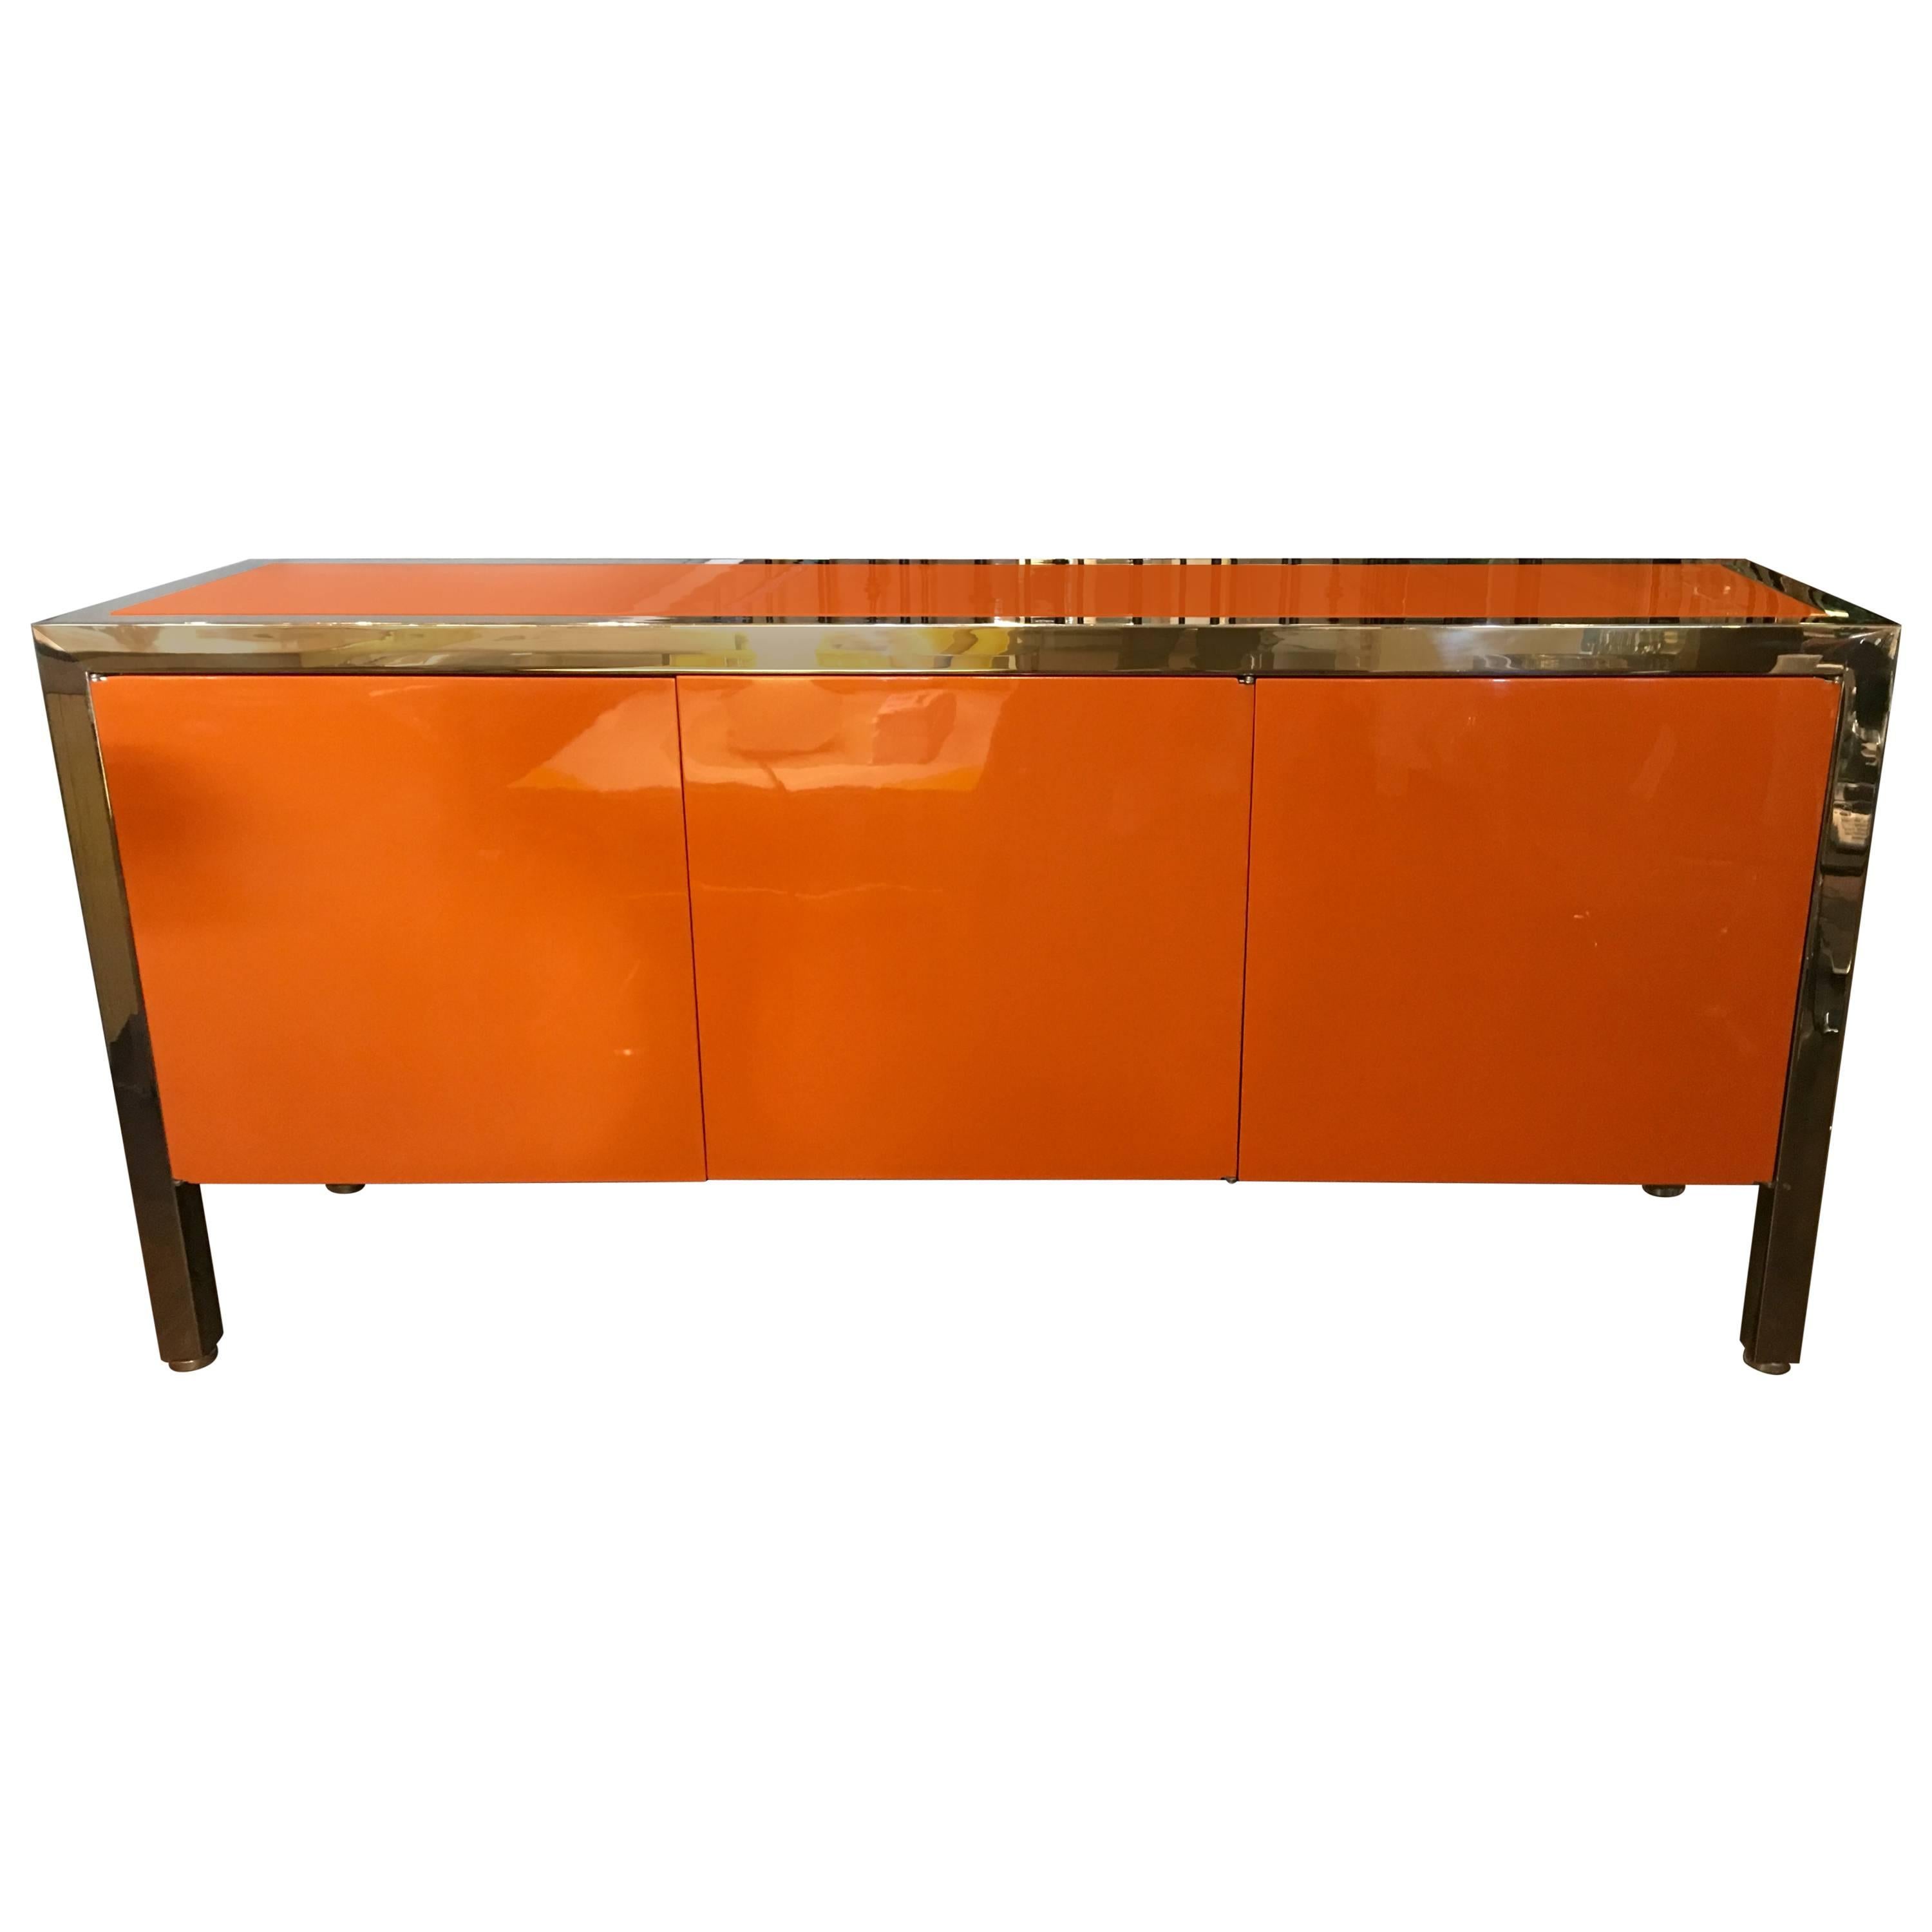 Pace Orange Lacquer Finish and Polished Steel Cabinet